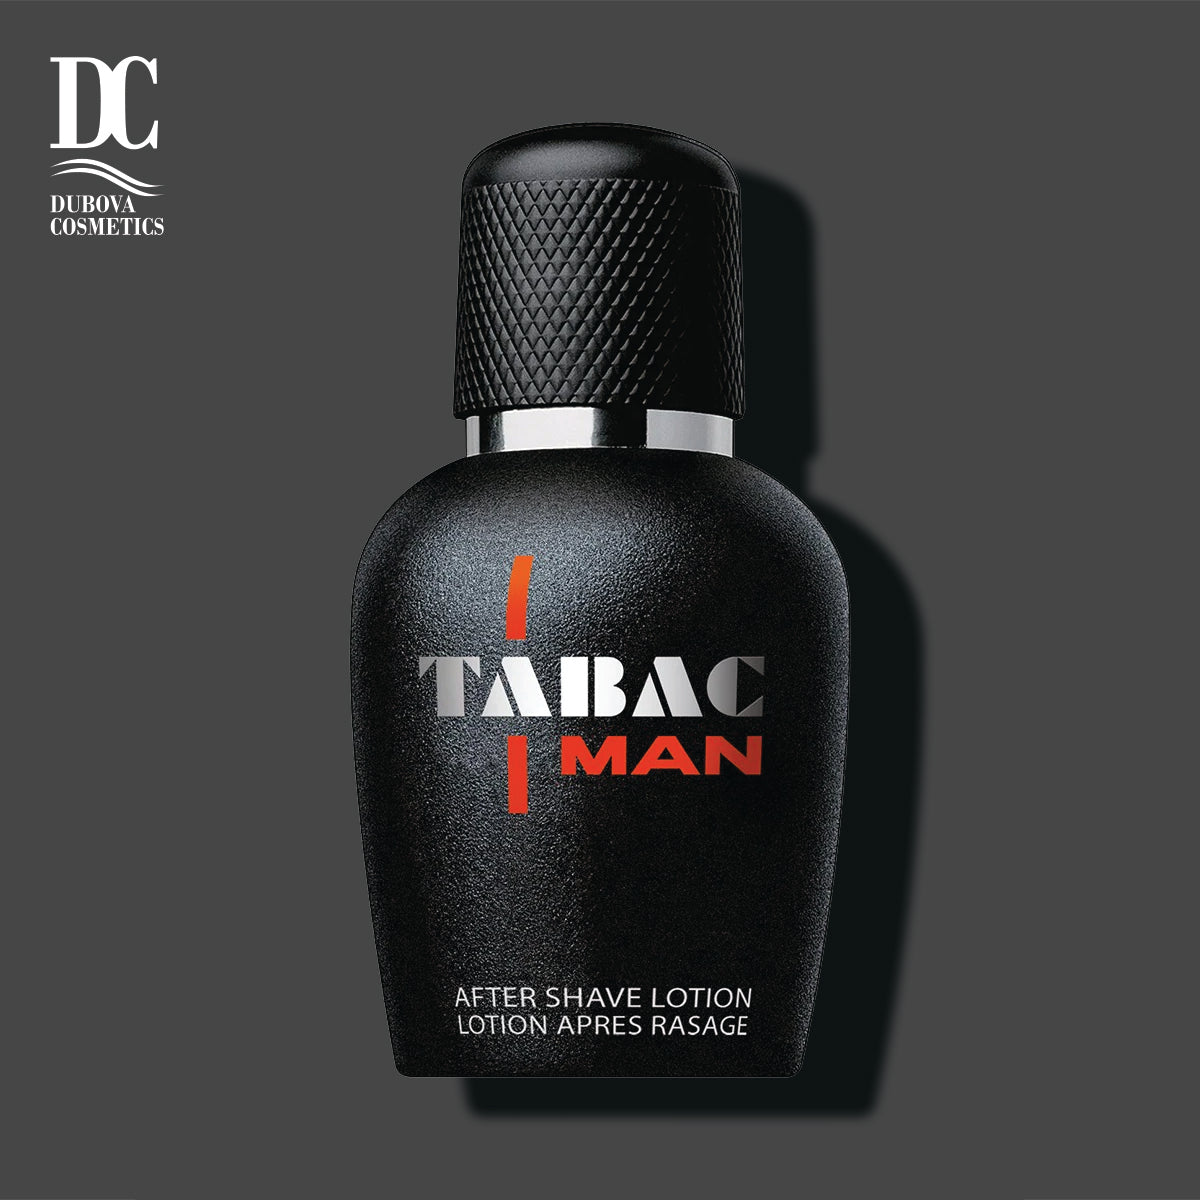 Tabac Man After Shave Lotion 75 ml